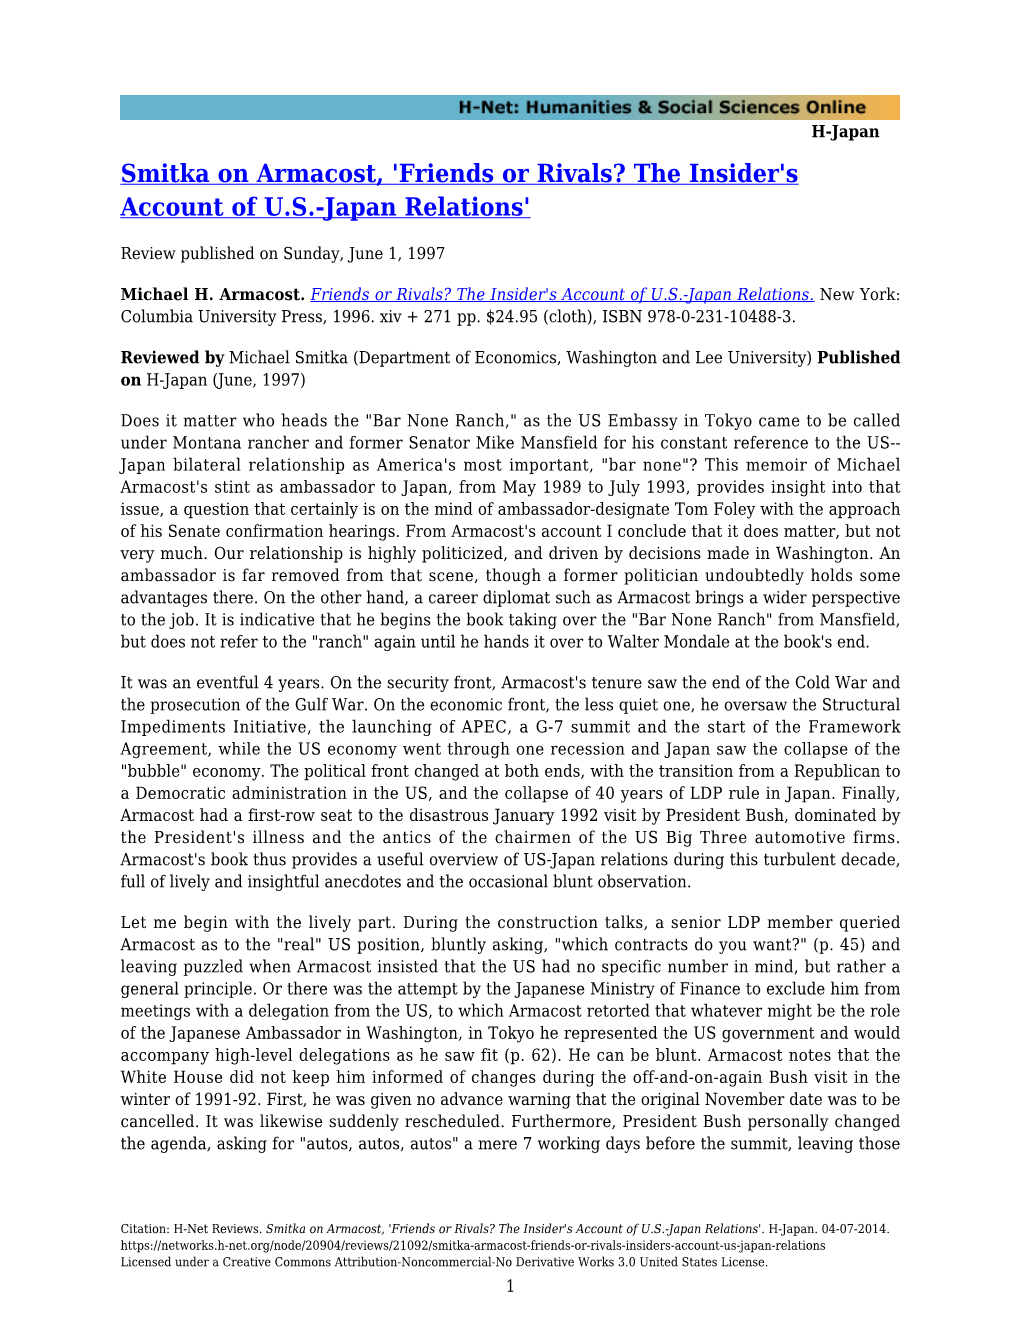 Smitka on Armacost, 'Friends Or Rivals? the Insider's Account of U.S.-Japan Relations'